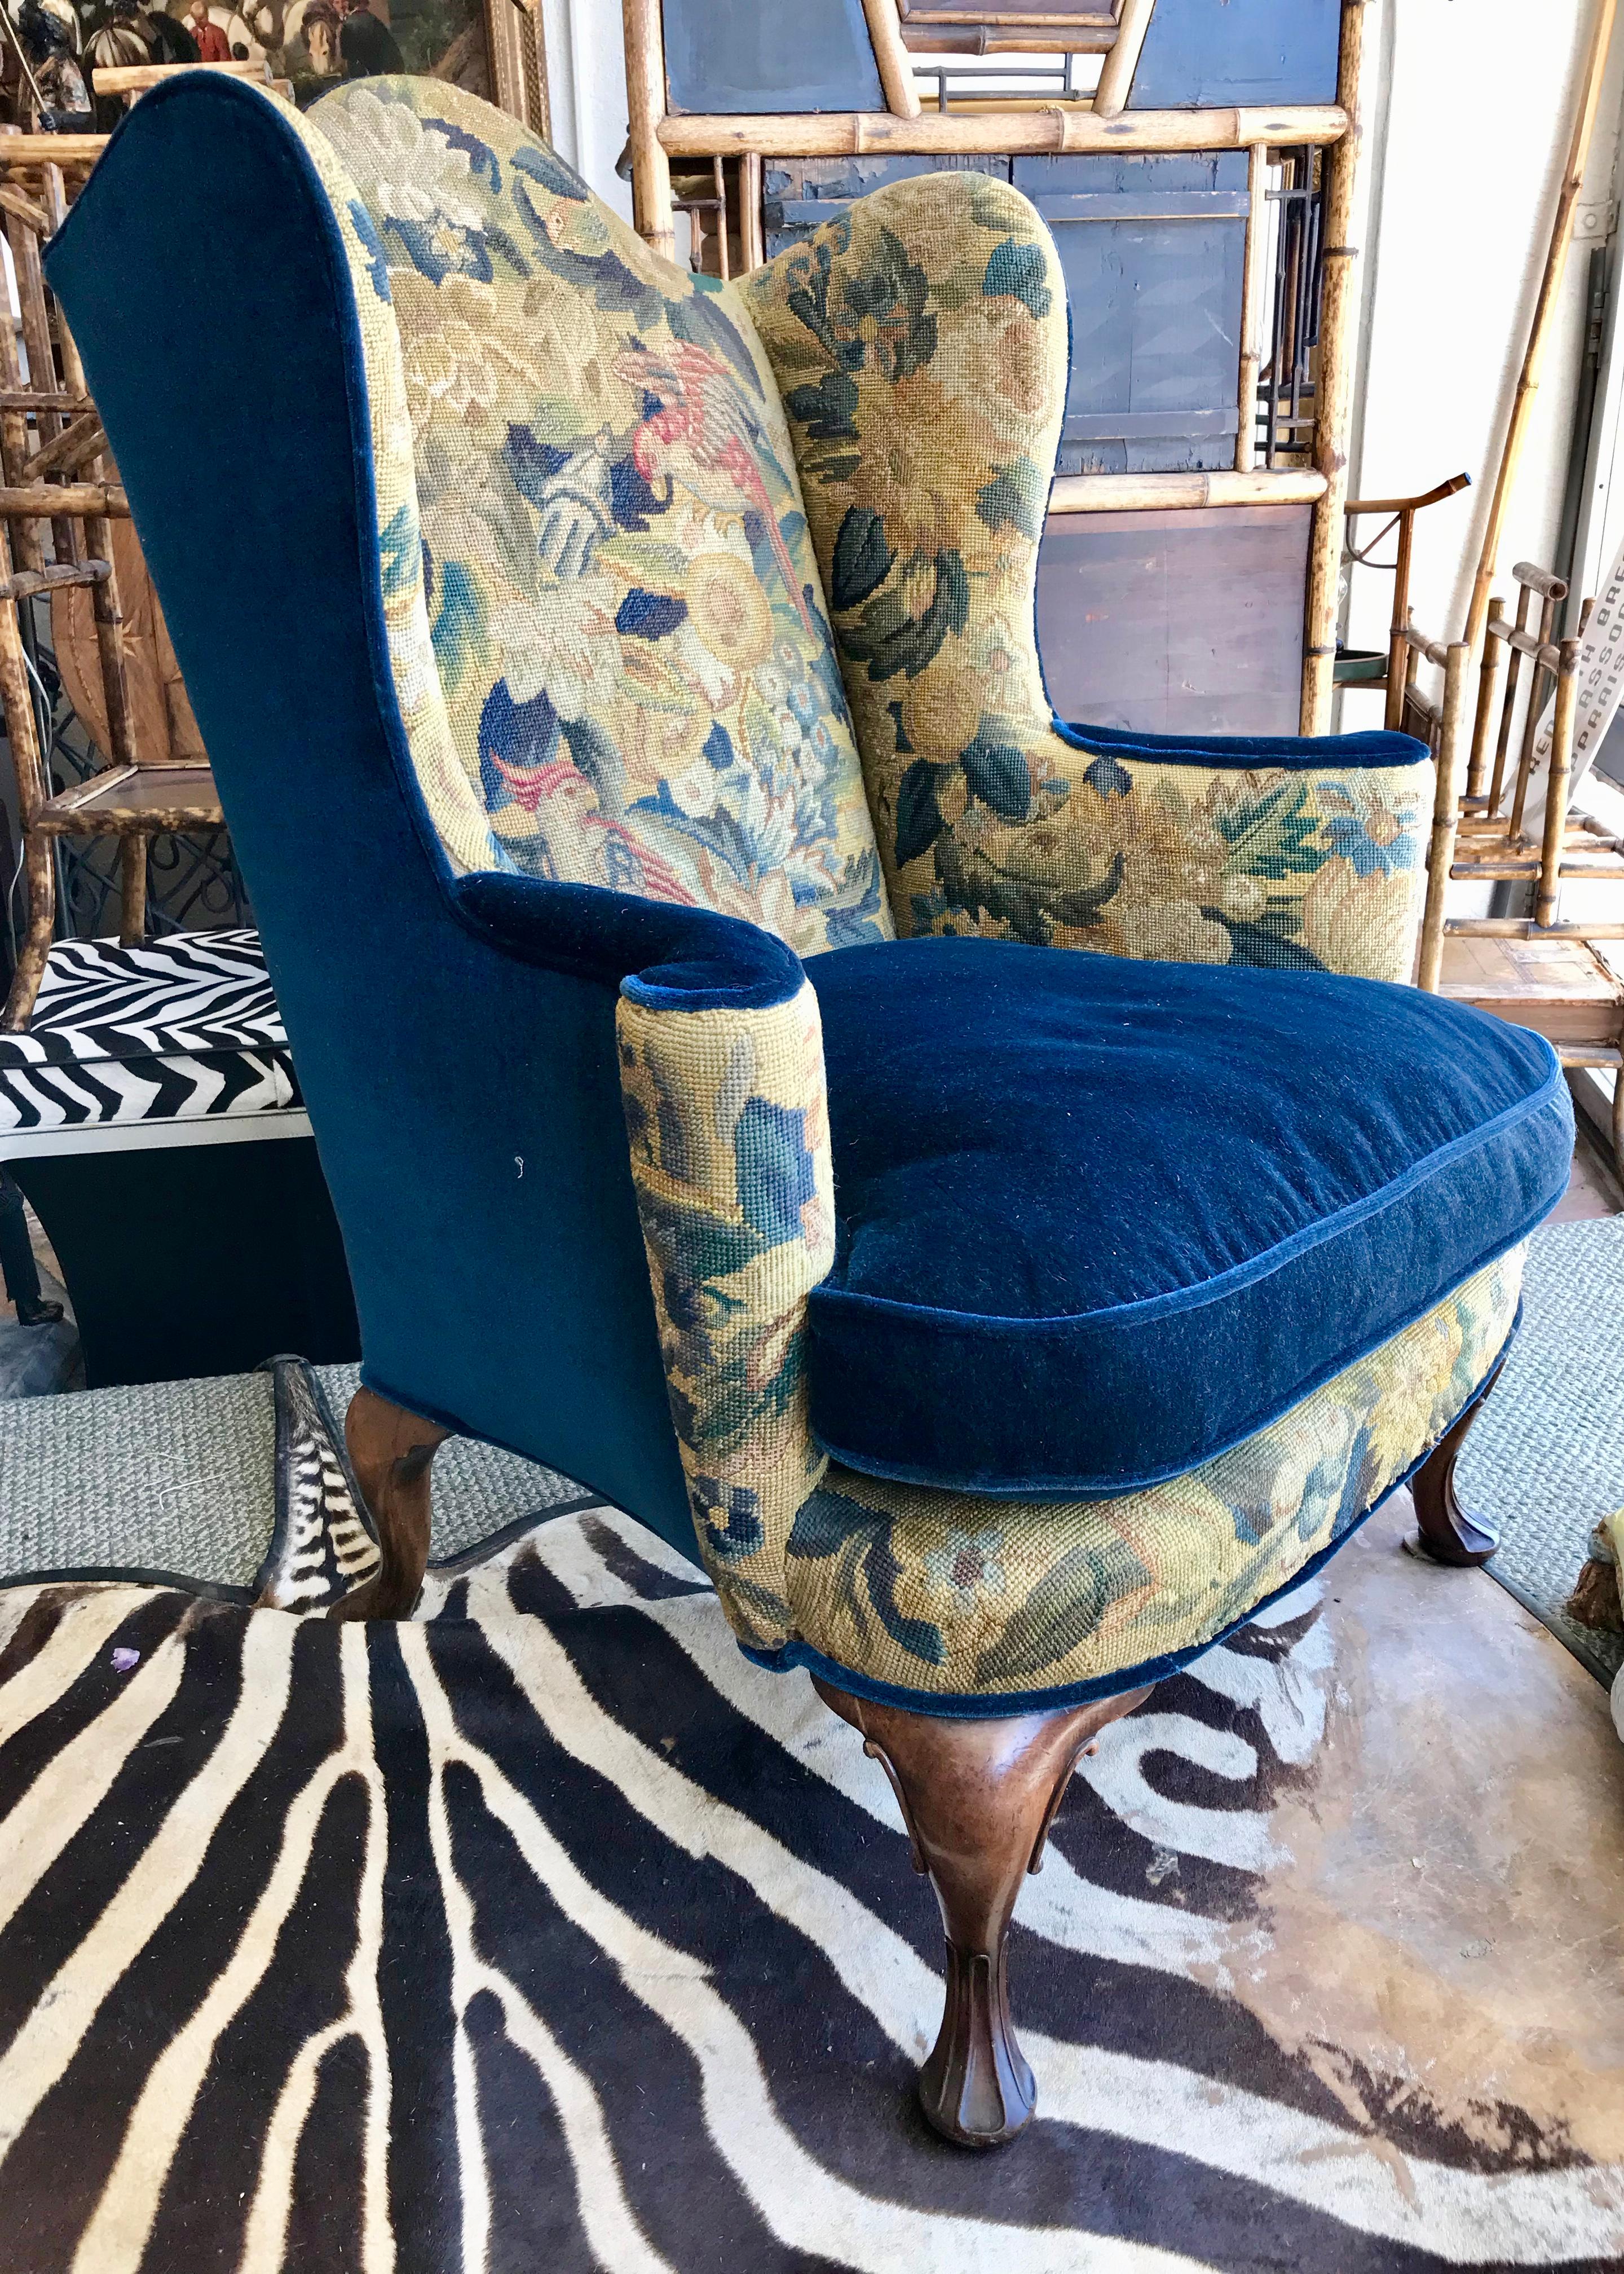 The chair is upholstered in a rich royal blue velvet and accented with an outstanding
